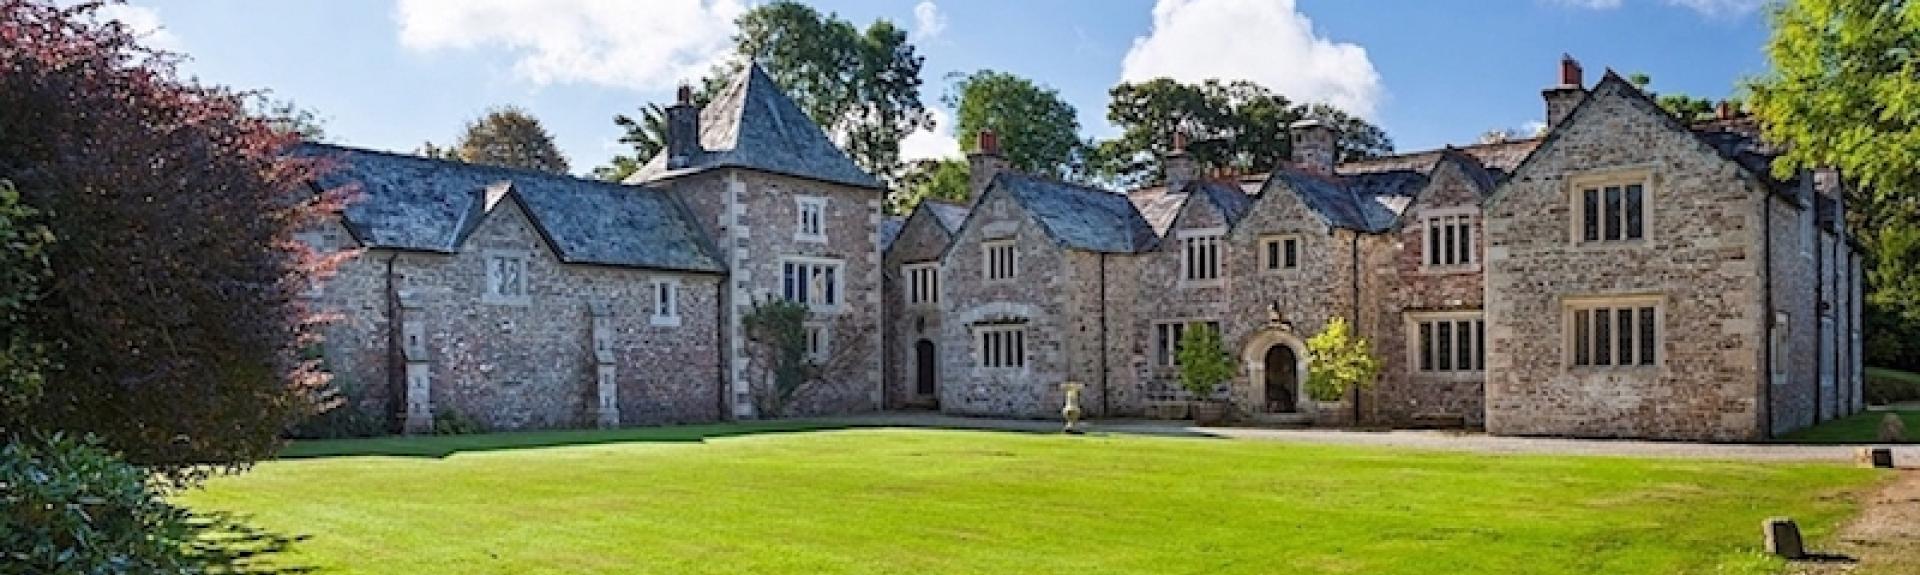 A sprawling Dartmoor Manor house ovrlooks a sweeping, tree-lined lawn.